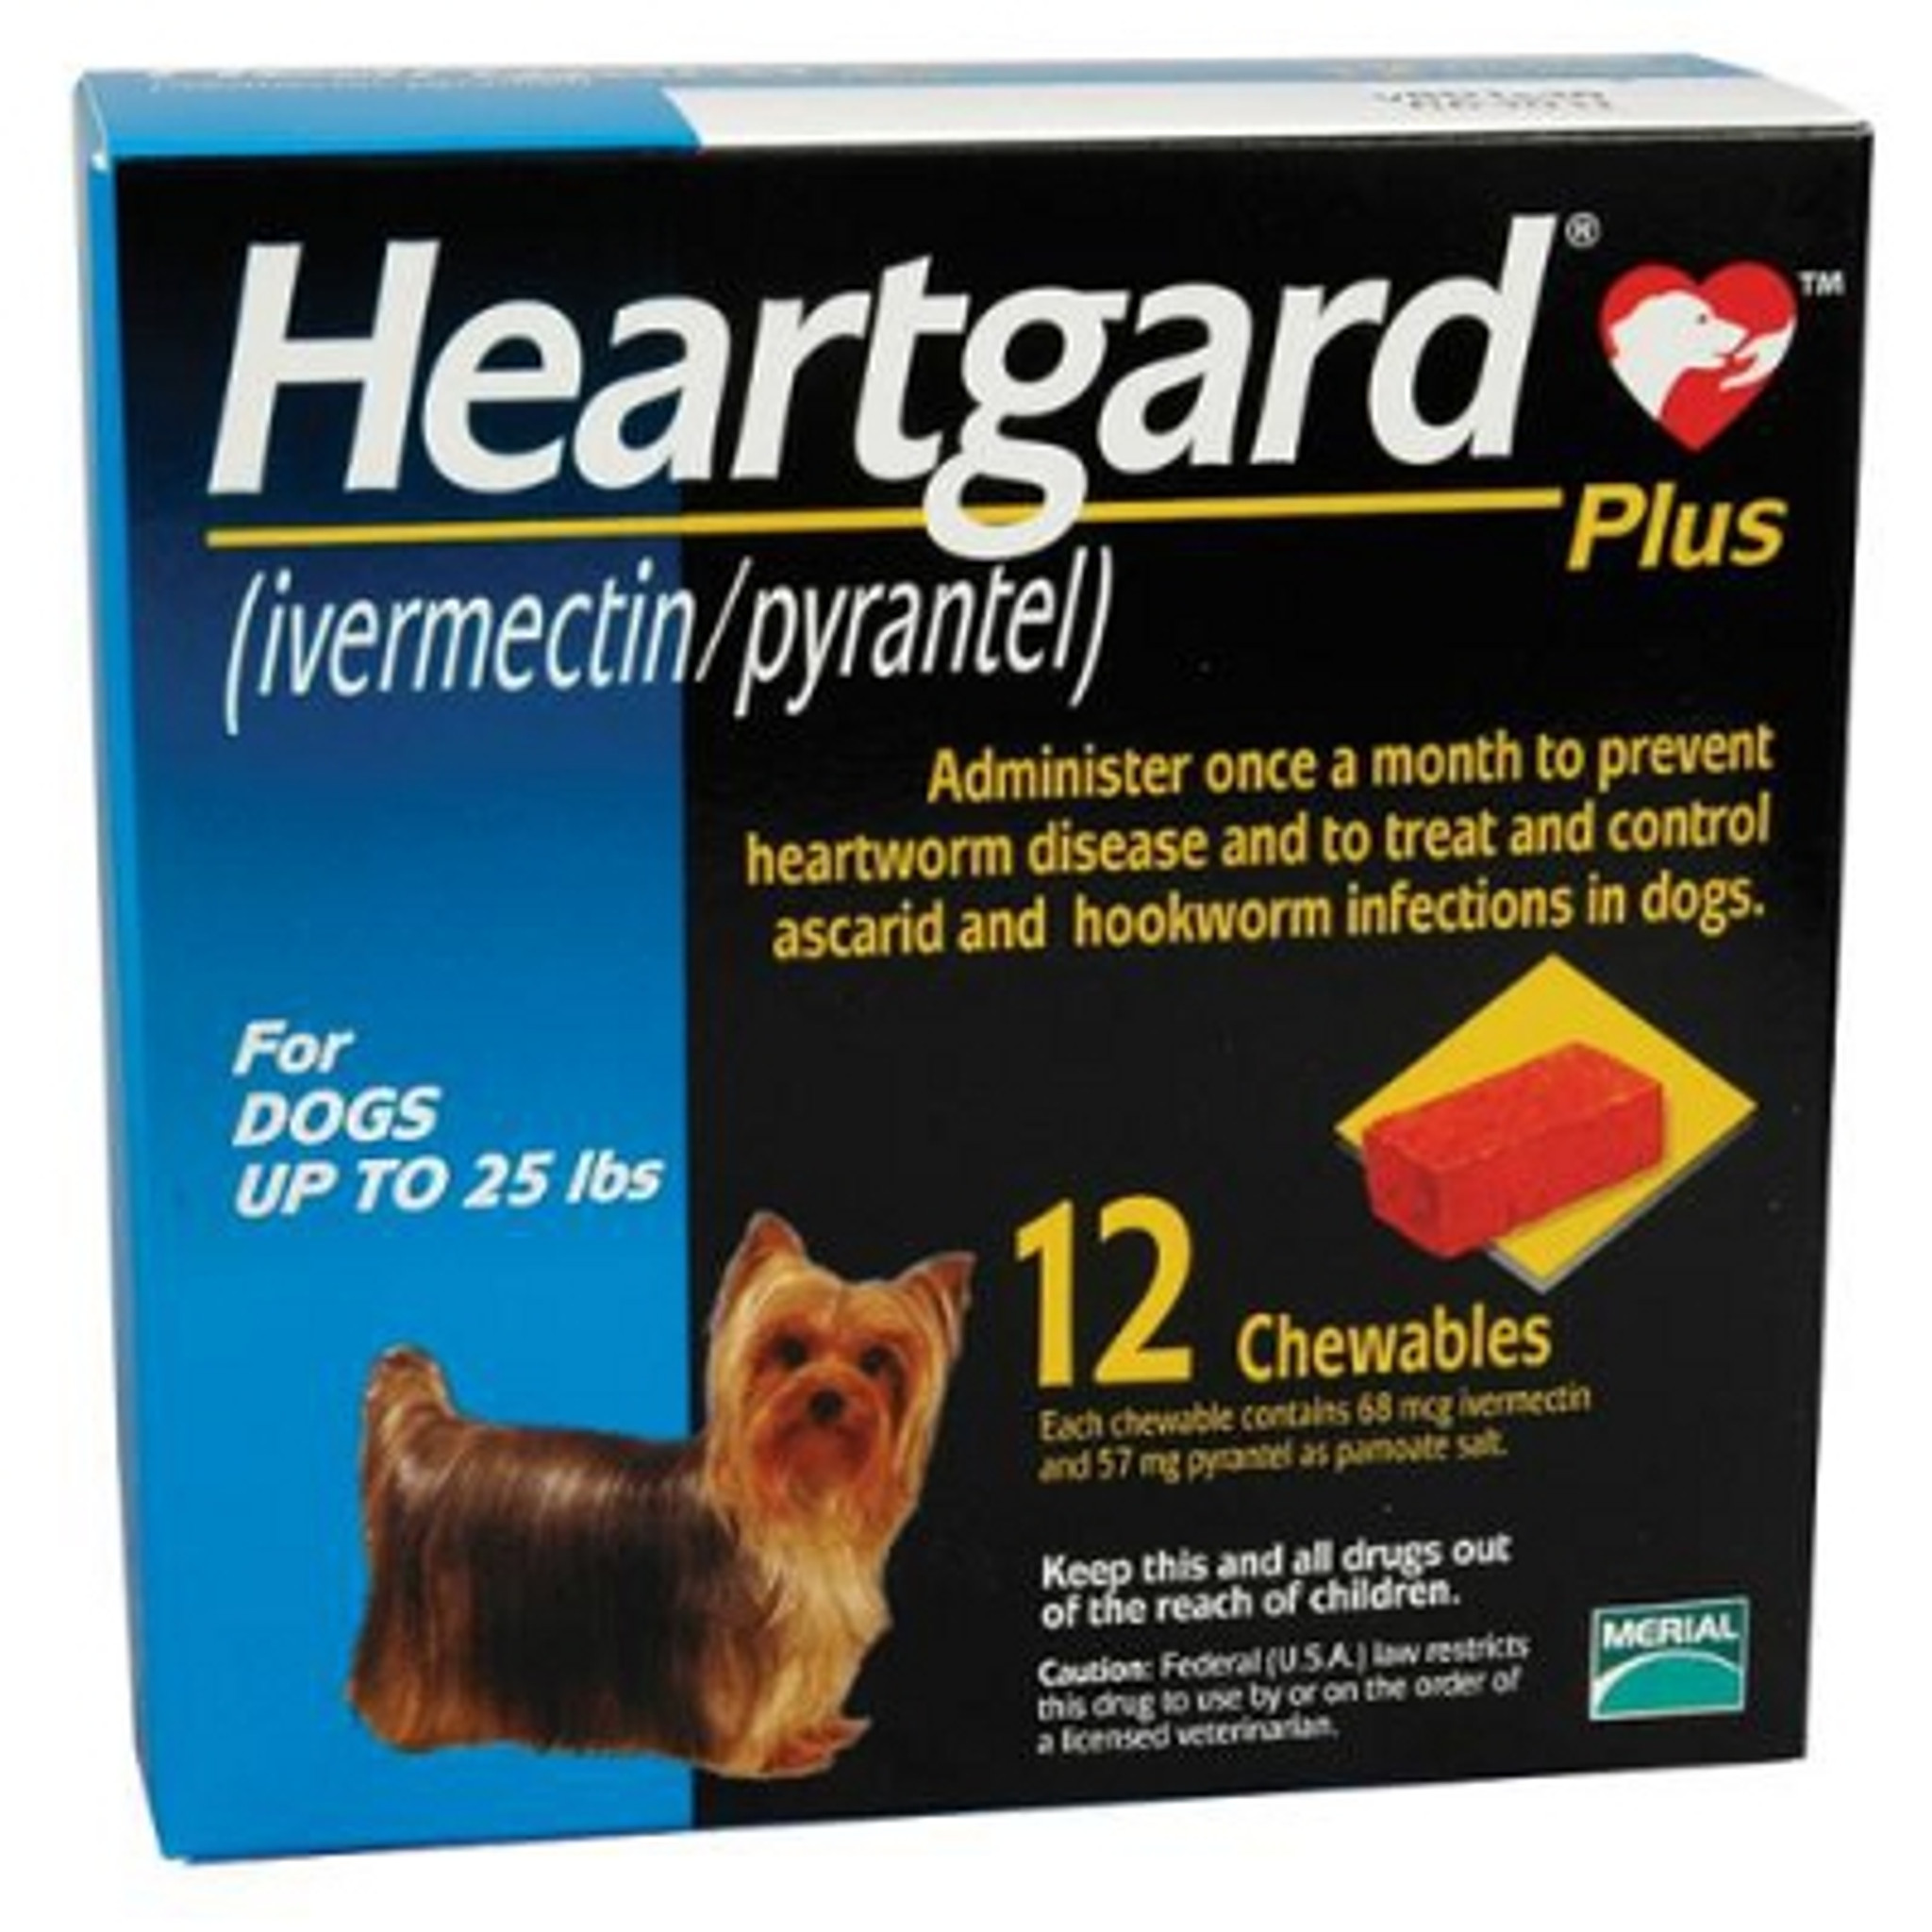 heartgard-plus-chewables-for-dogs-up-to-25-lbs-blue-12-pack-sierra